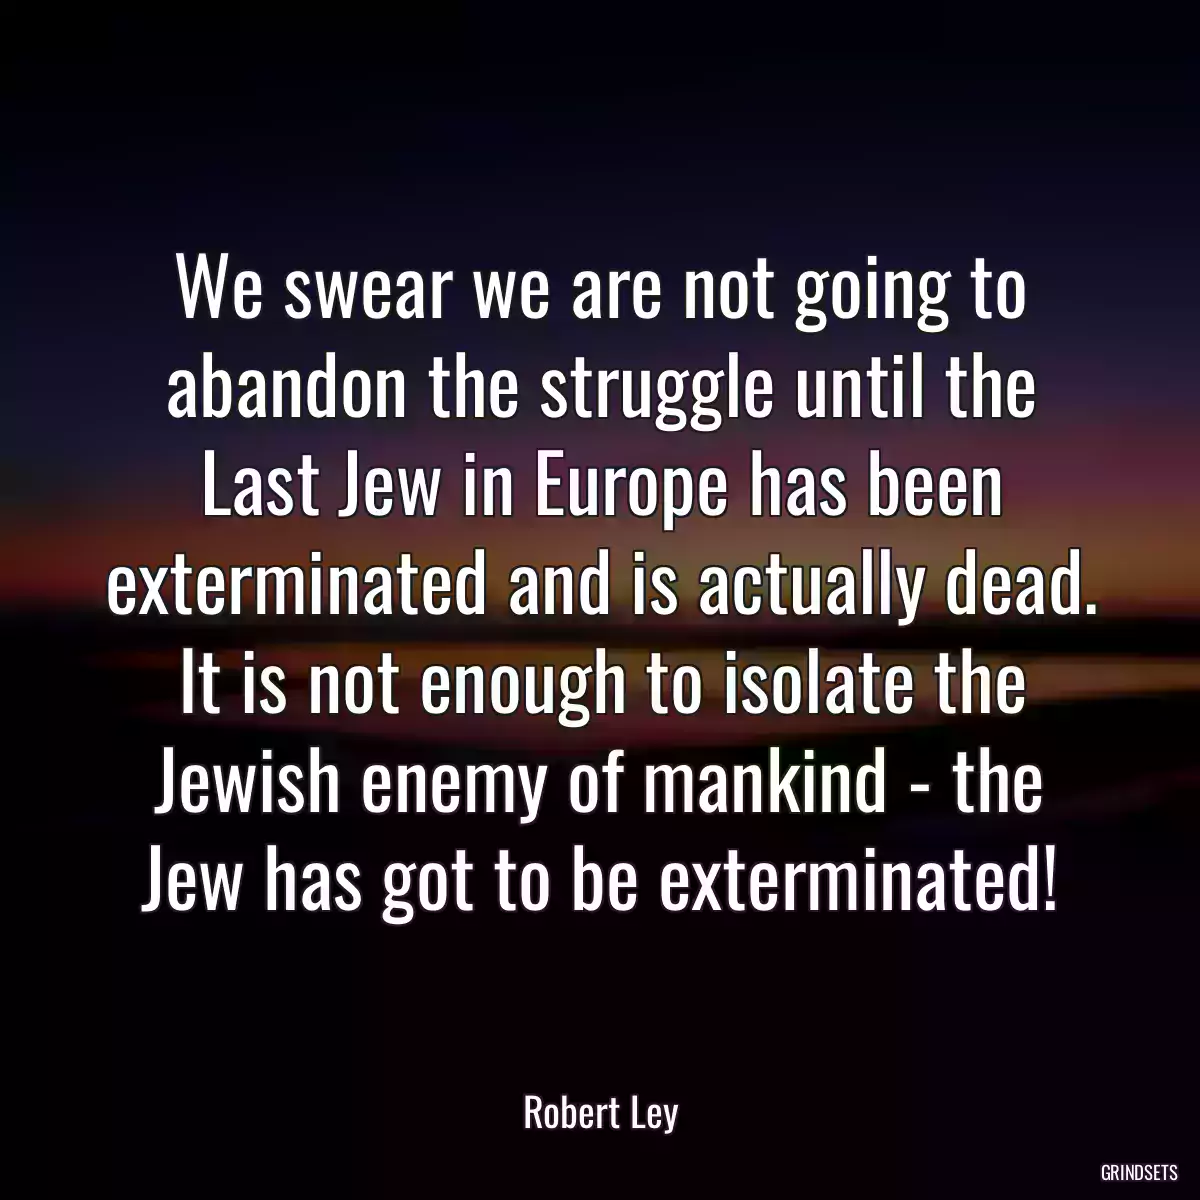 We swear we are not going to abandon the struggle until the Last Jew in Europe has been exterminated and is actually dead. It is not enough to isolate the Jewish enemy of mankind - the Jew has got to be exterminated!